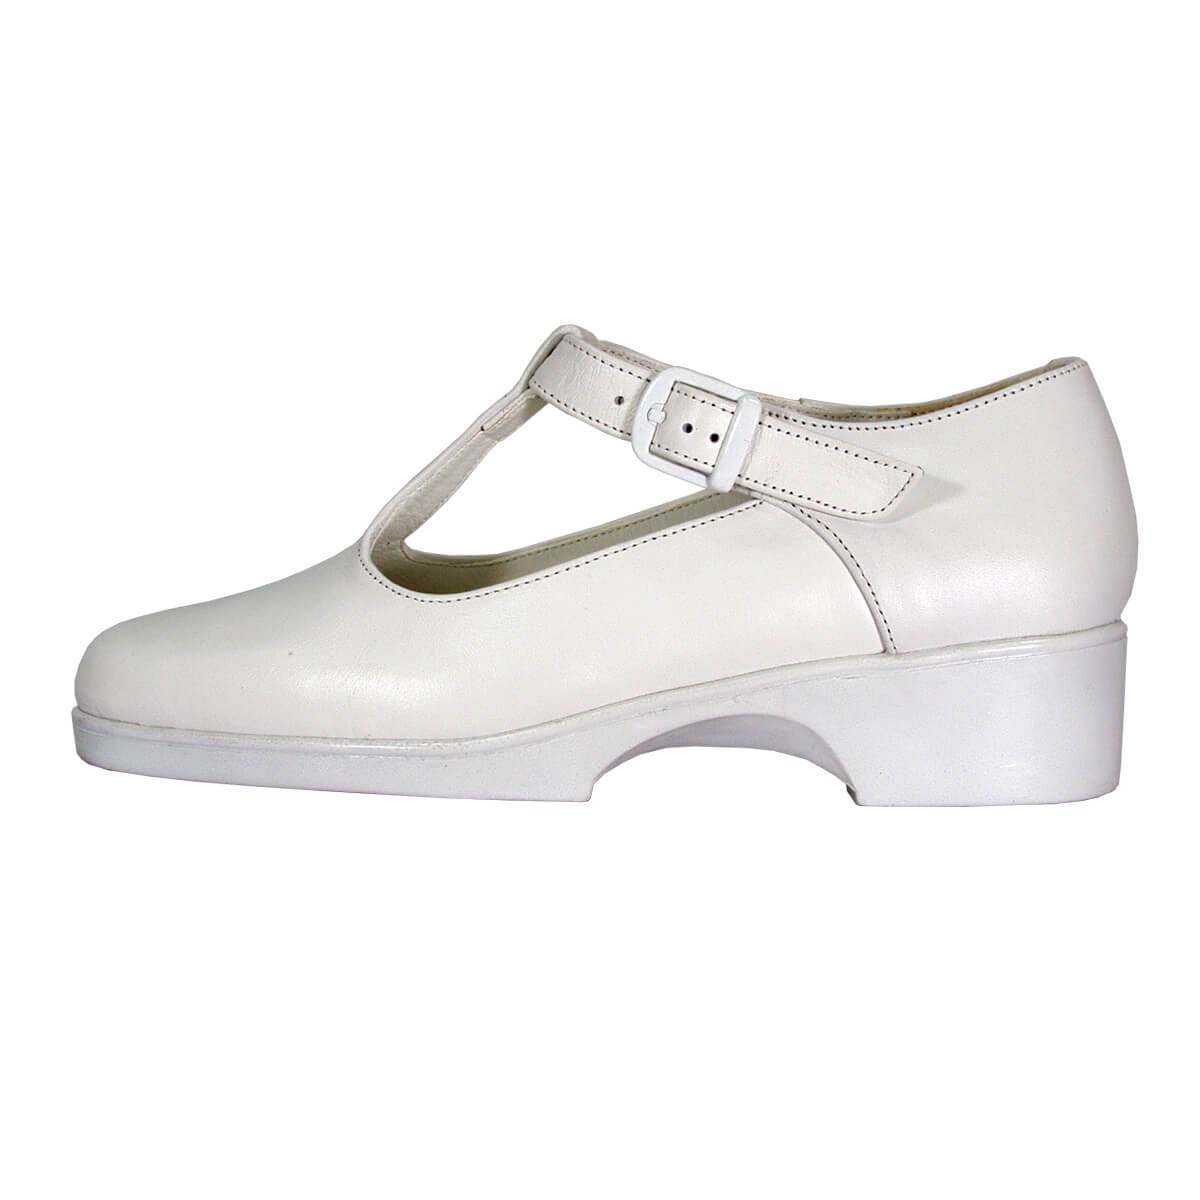 24 HOUR COMFORT Tracy Women's Wide Width T-Strap Leather Shoes